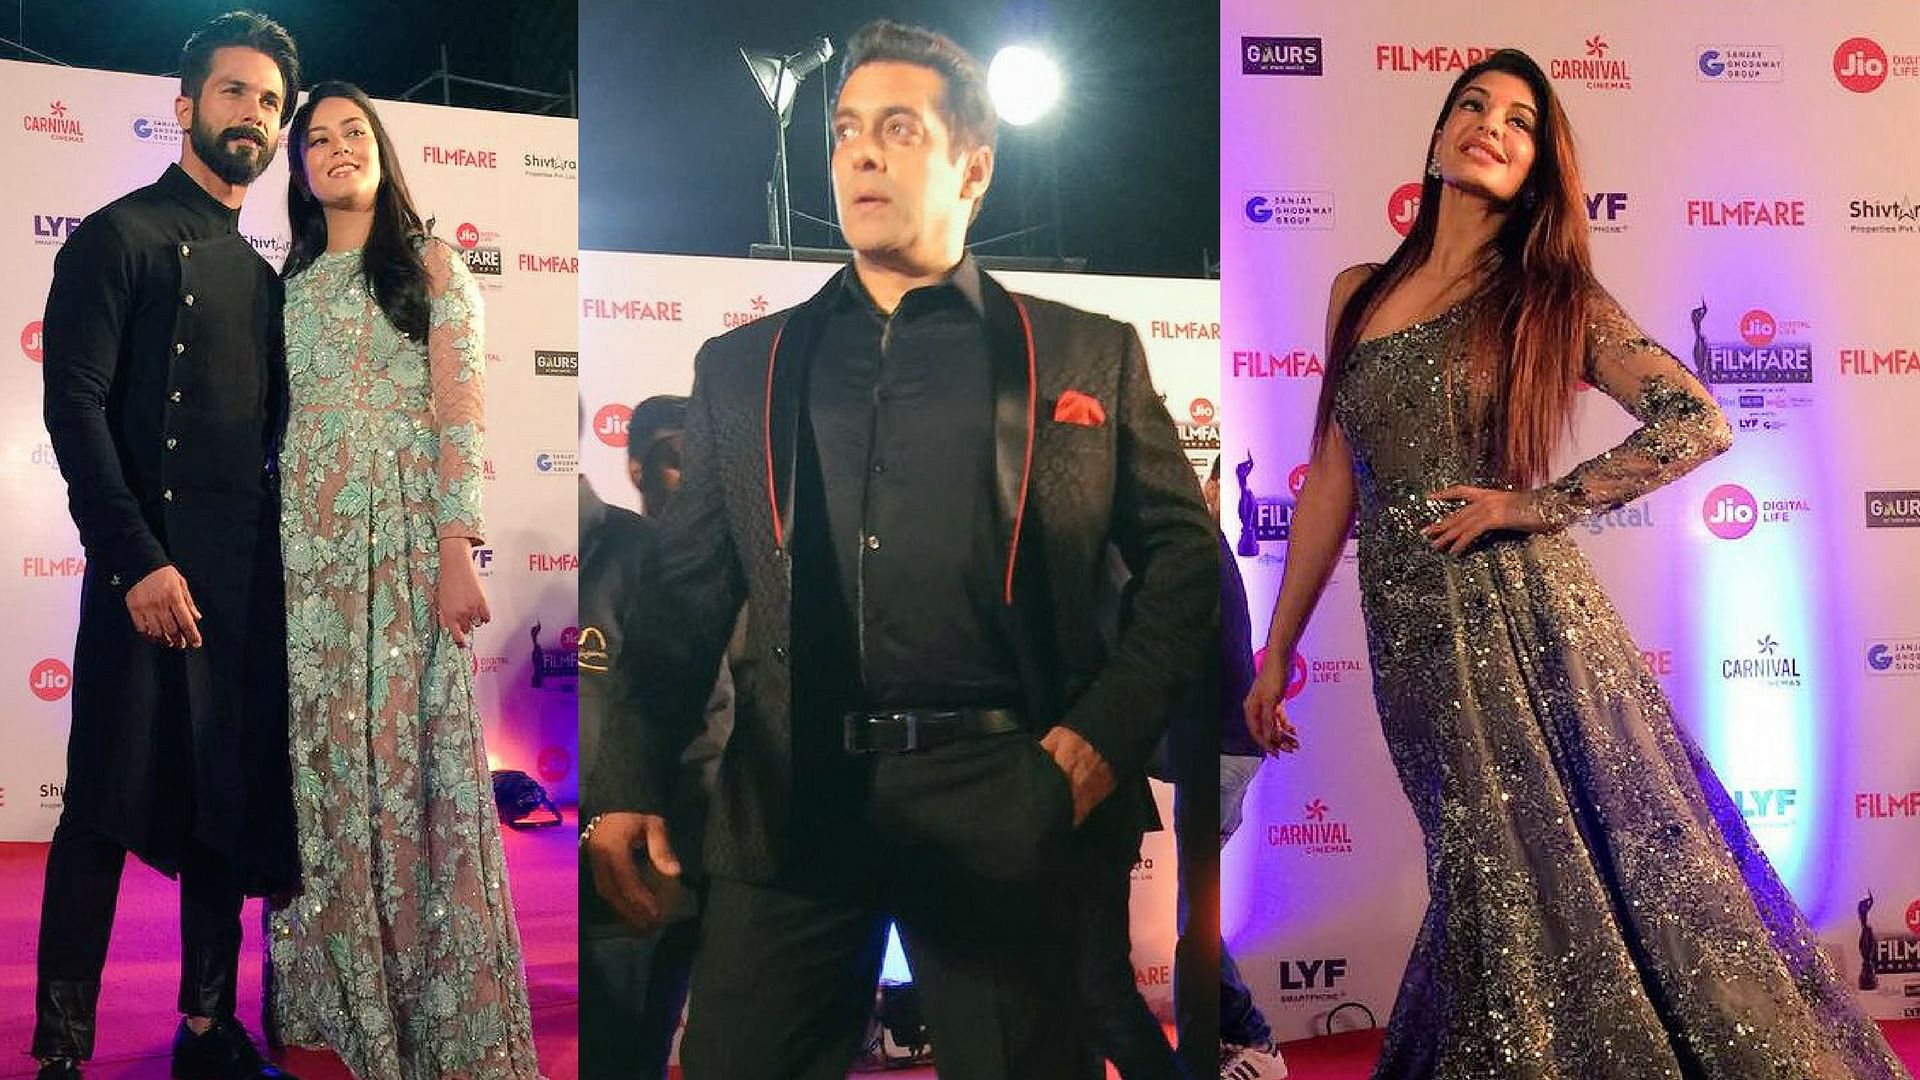 Shahid and Mira Kapoor, Salman Khan and Jacqueline Fernandez on the red carpet. (Photo courtesy: <a href="https://twitter.com/filmfare">Twitter @filmfare</a>)